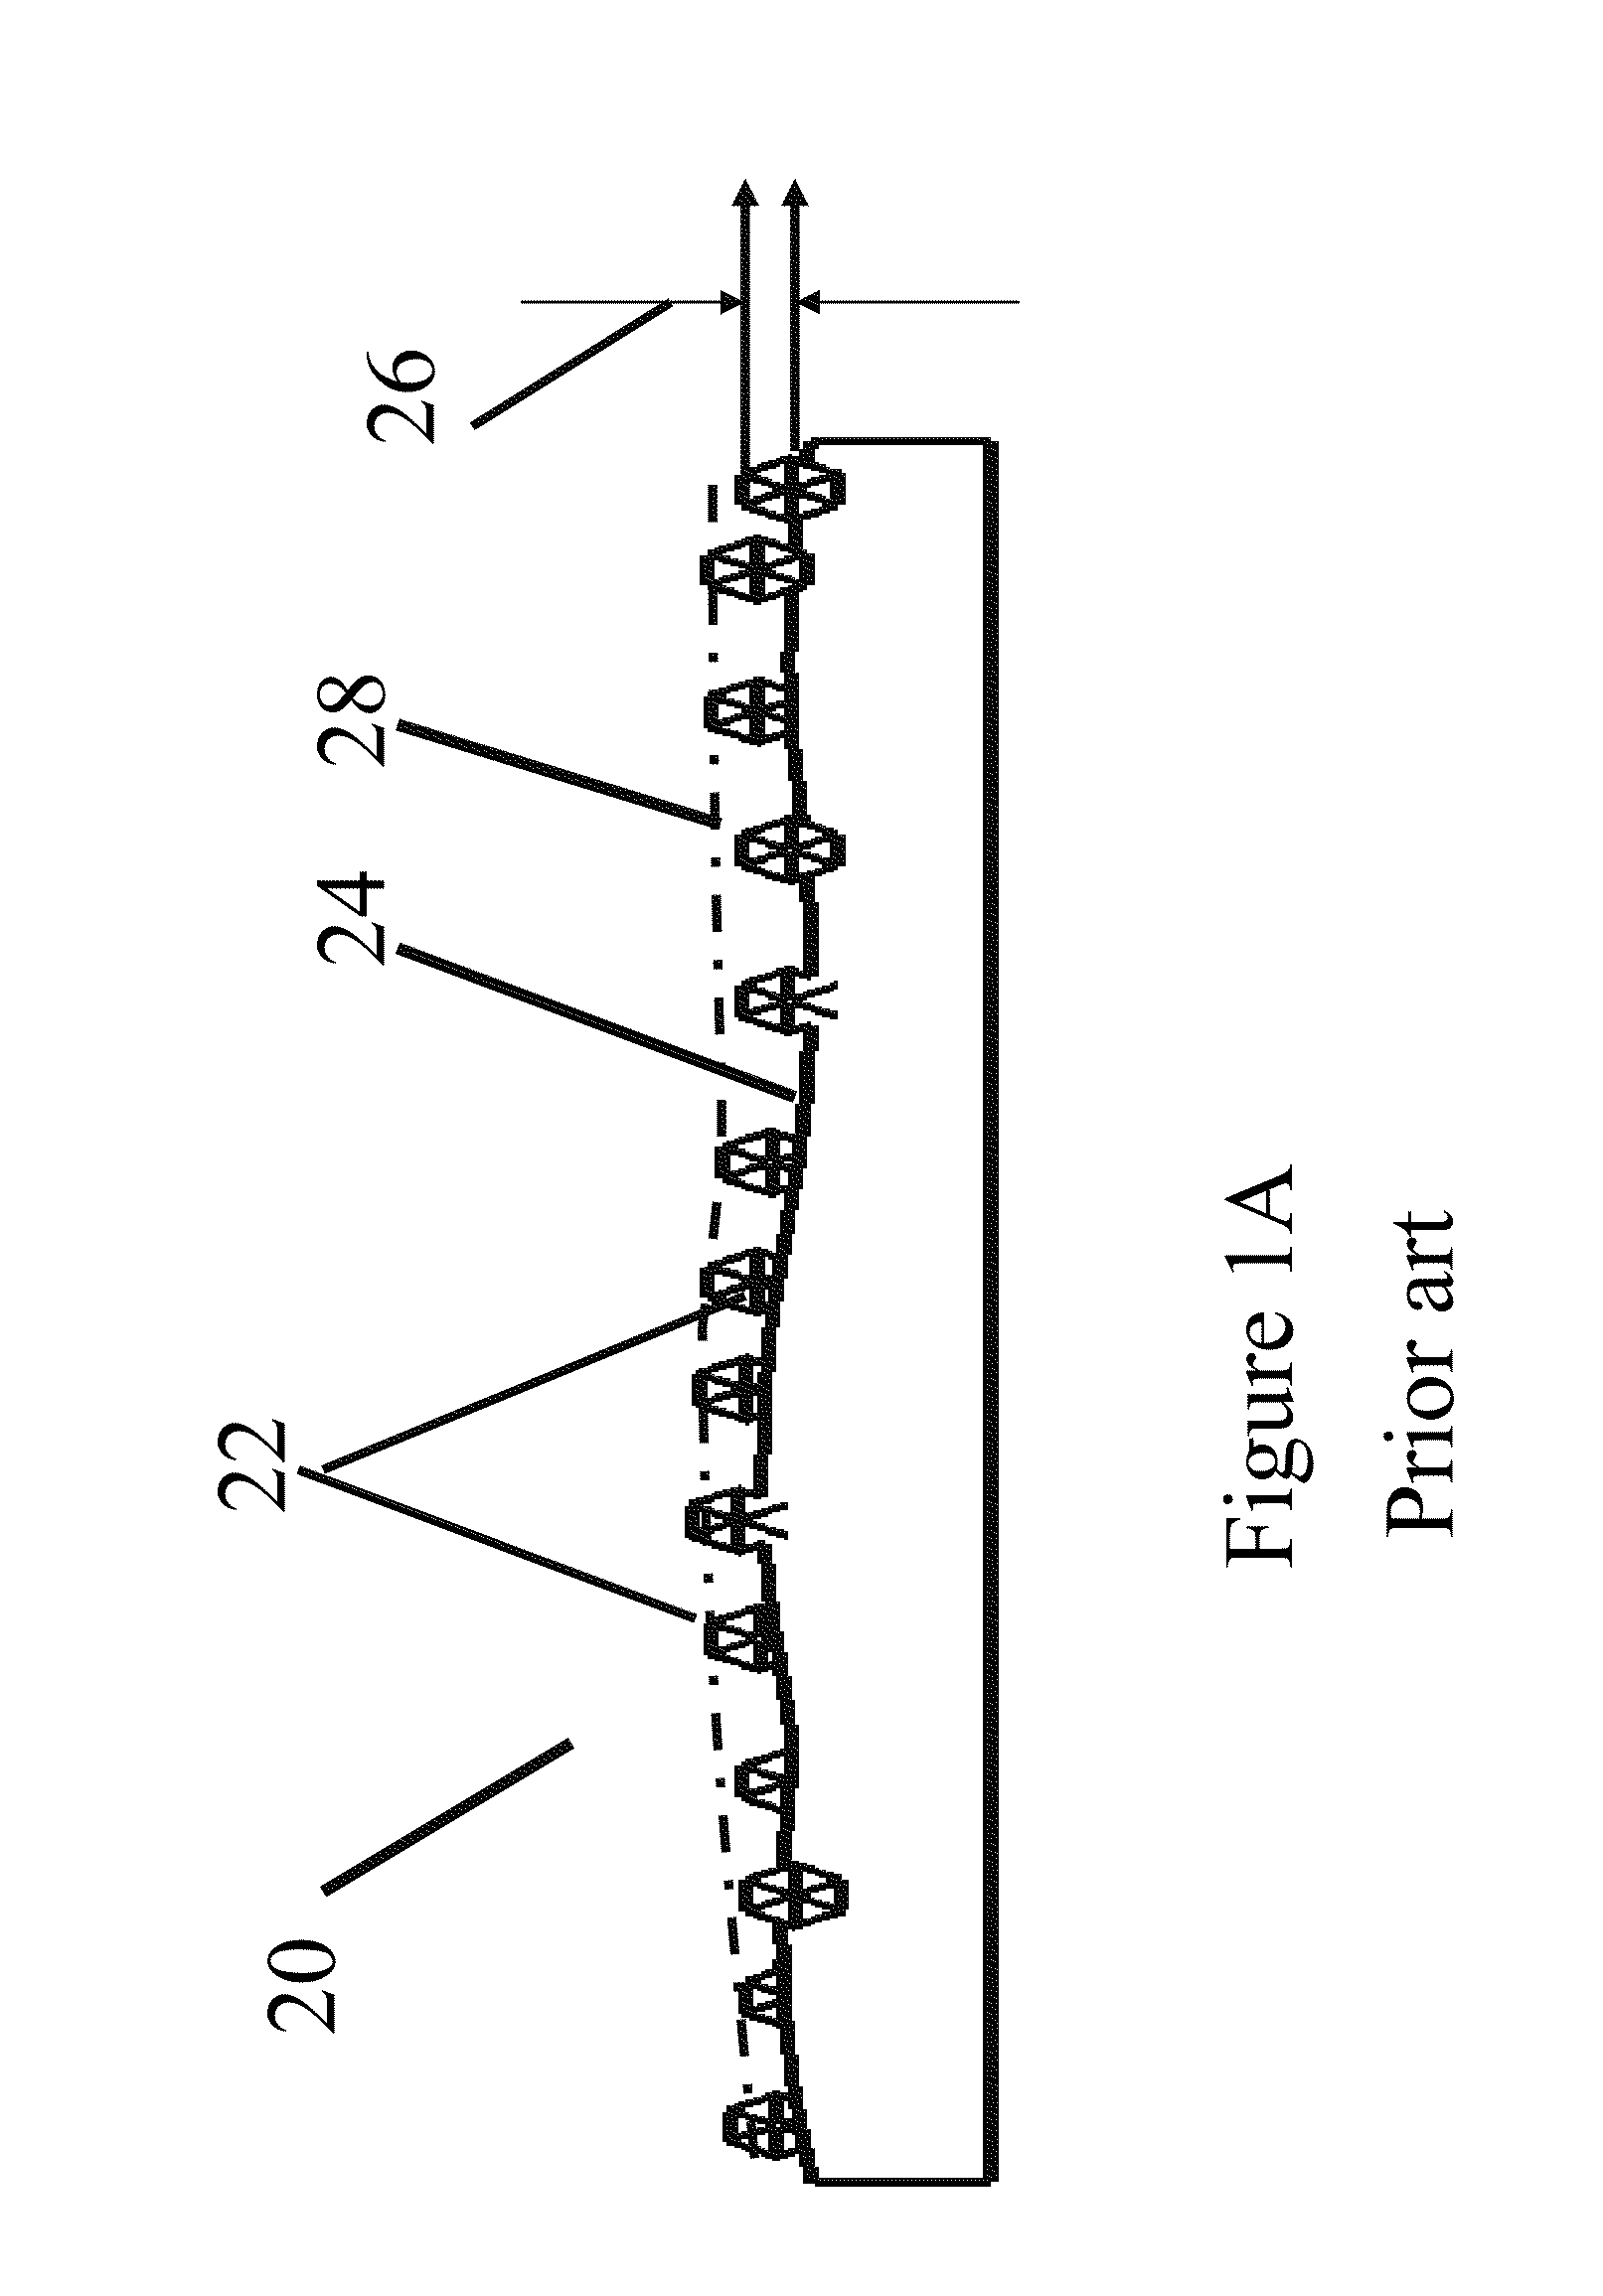 Method and apparatus for embedding abrasive particles into substrates